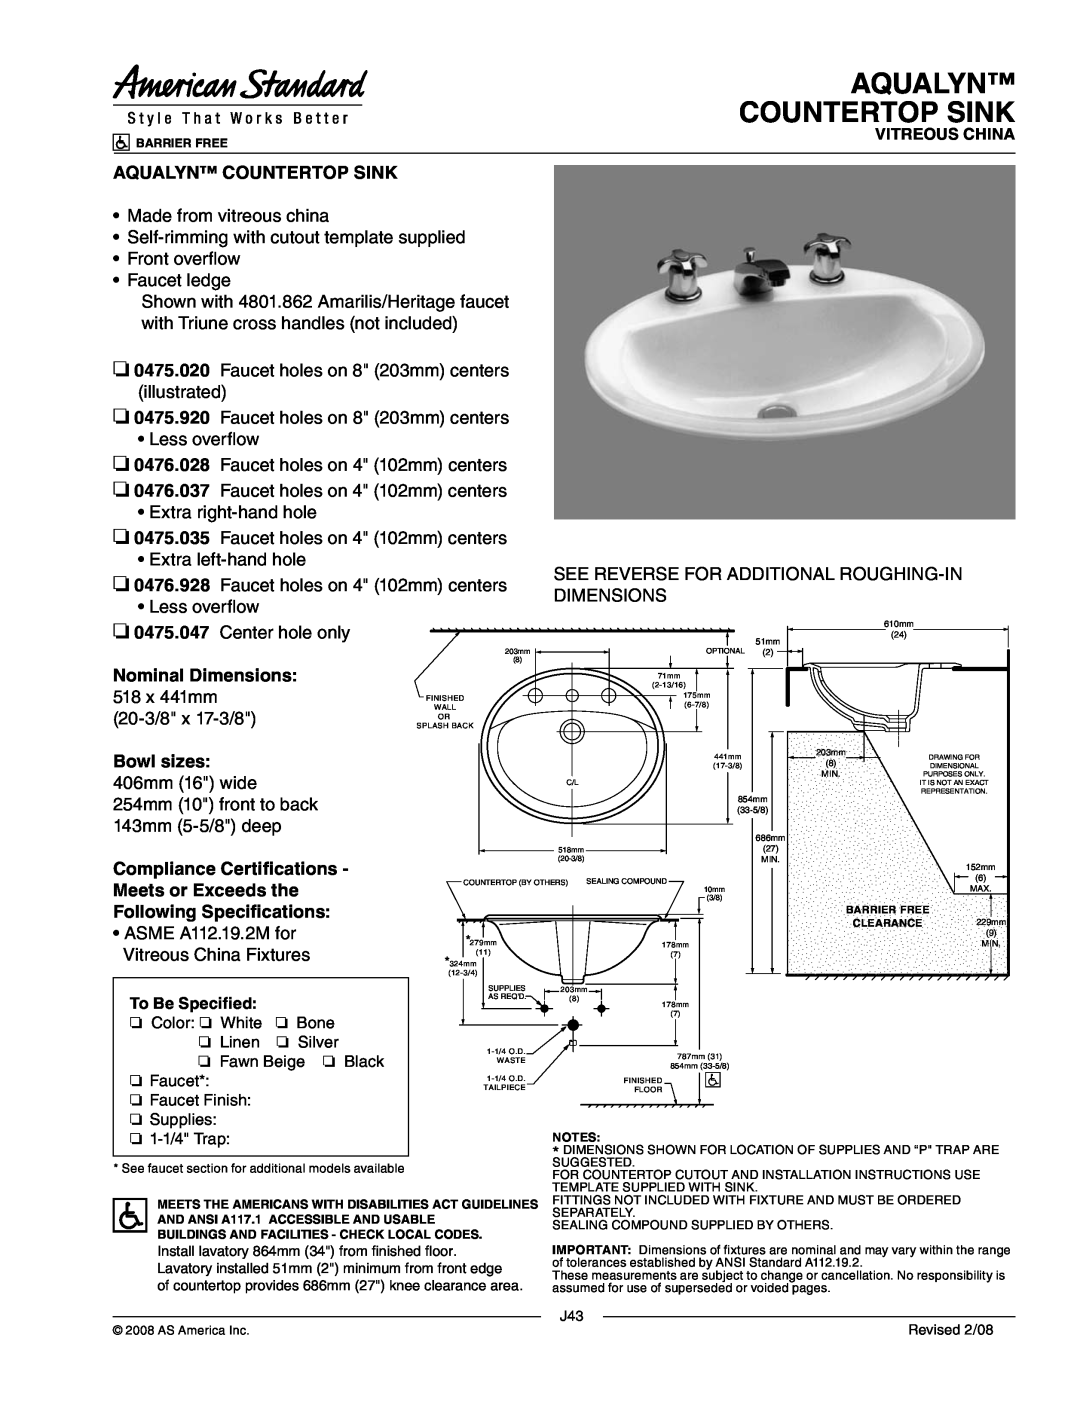 American Standard 0475.020 dimensions Aqualyn Countertop Sink, Nominal Dimensions, Bowl sizes, Compliance Certifications 